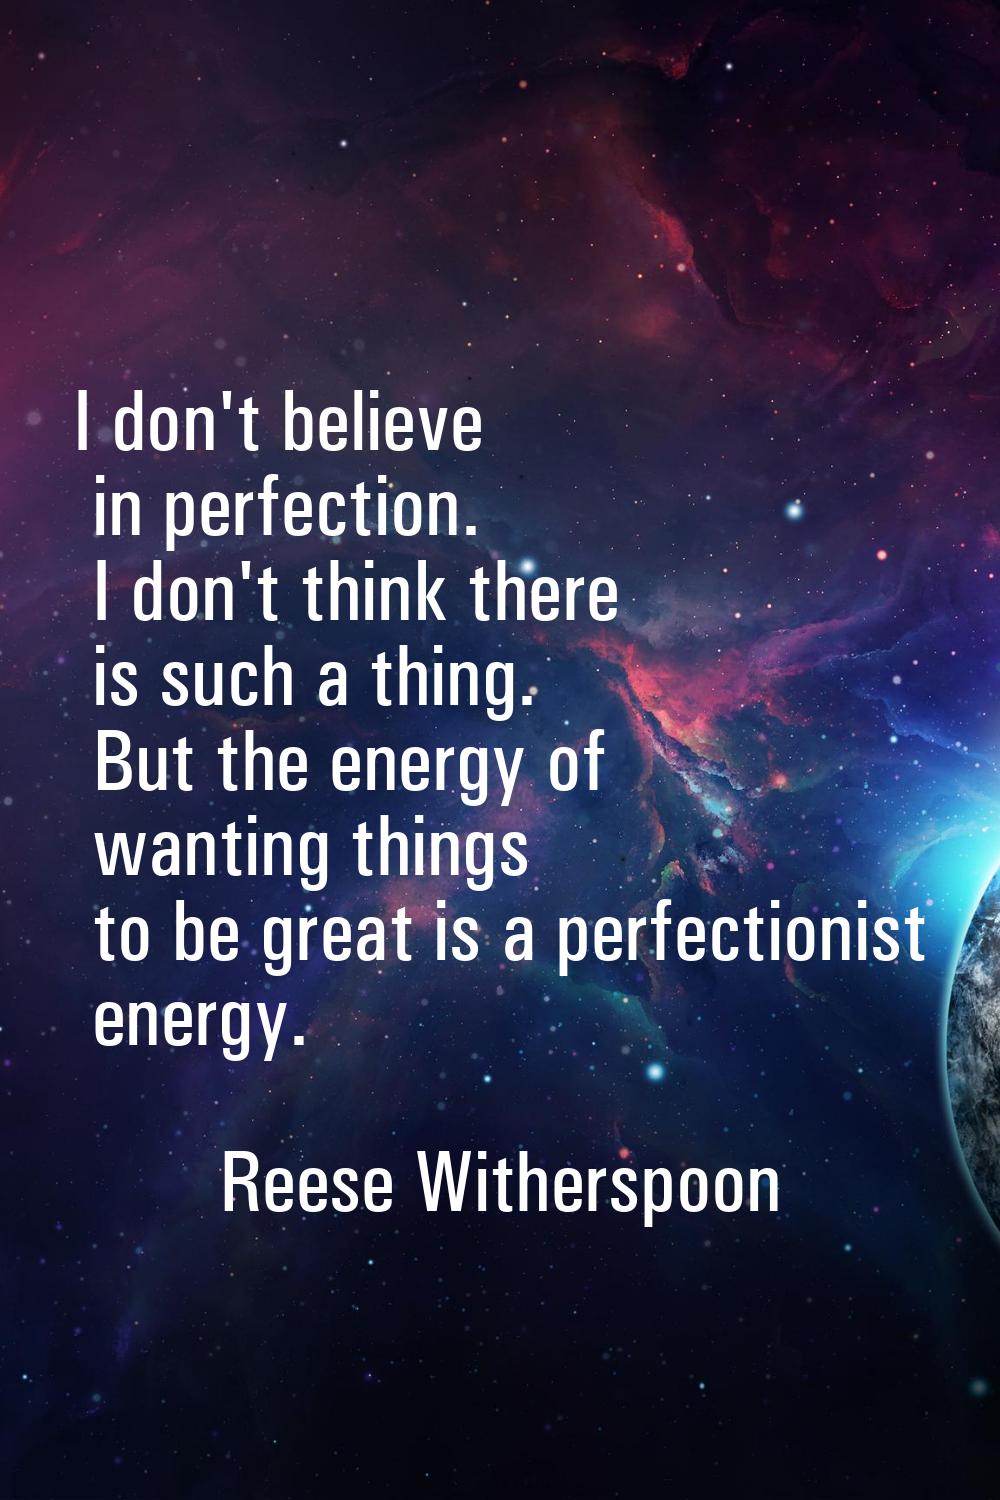 I don't believe in perfection. I don't think there is such a thing. But the energy of wanting thing